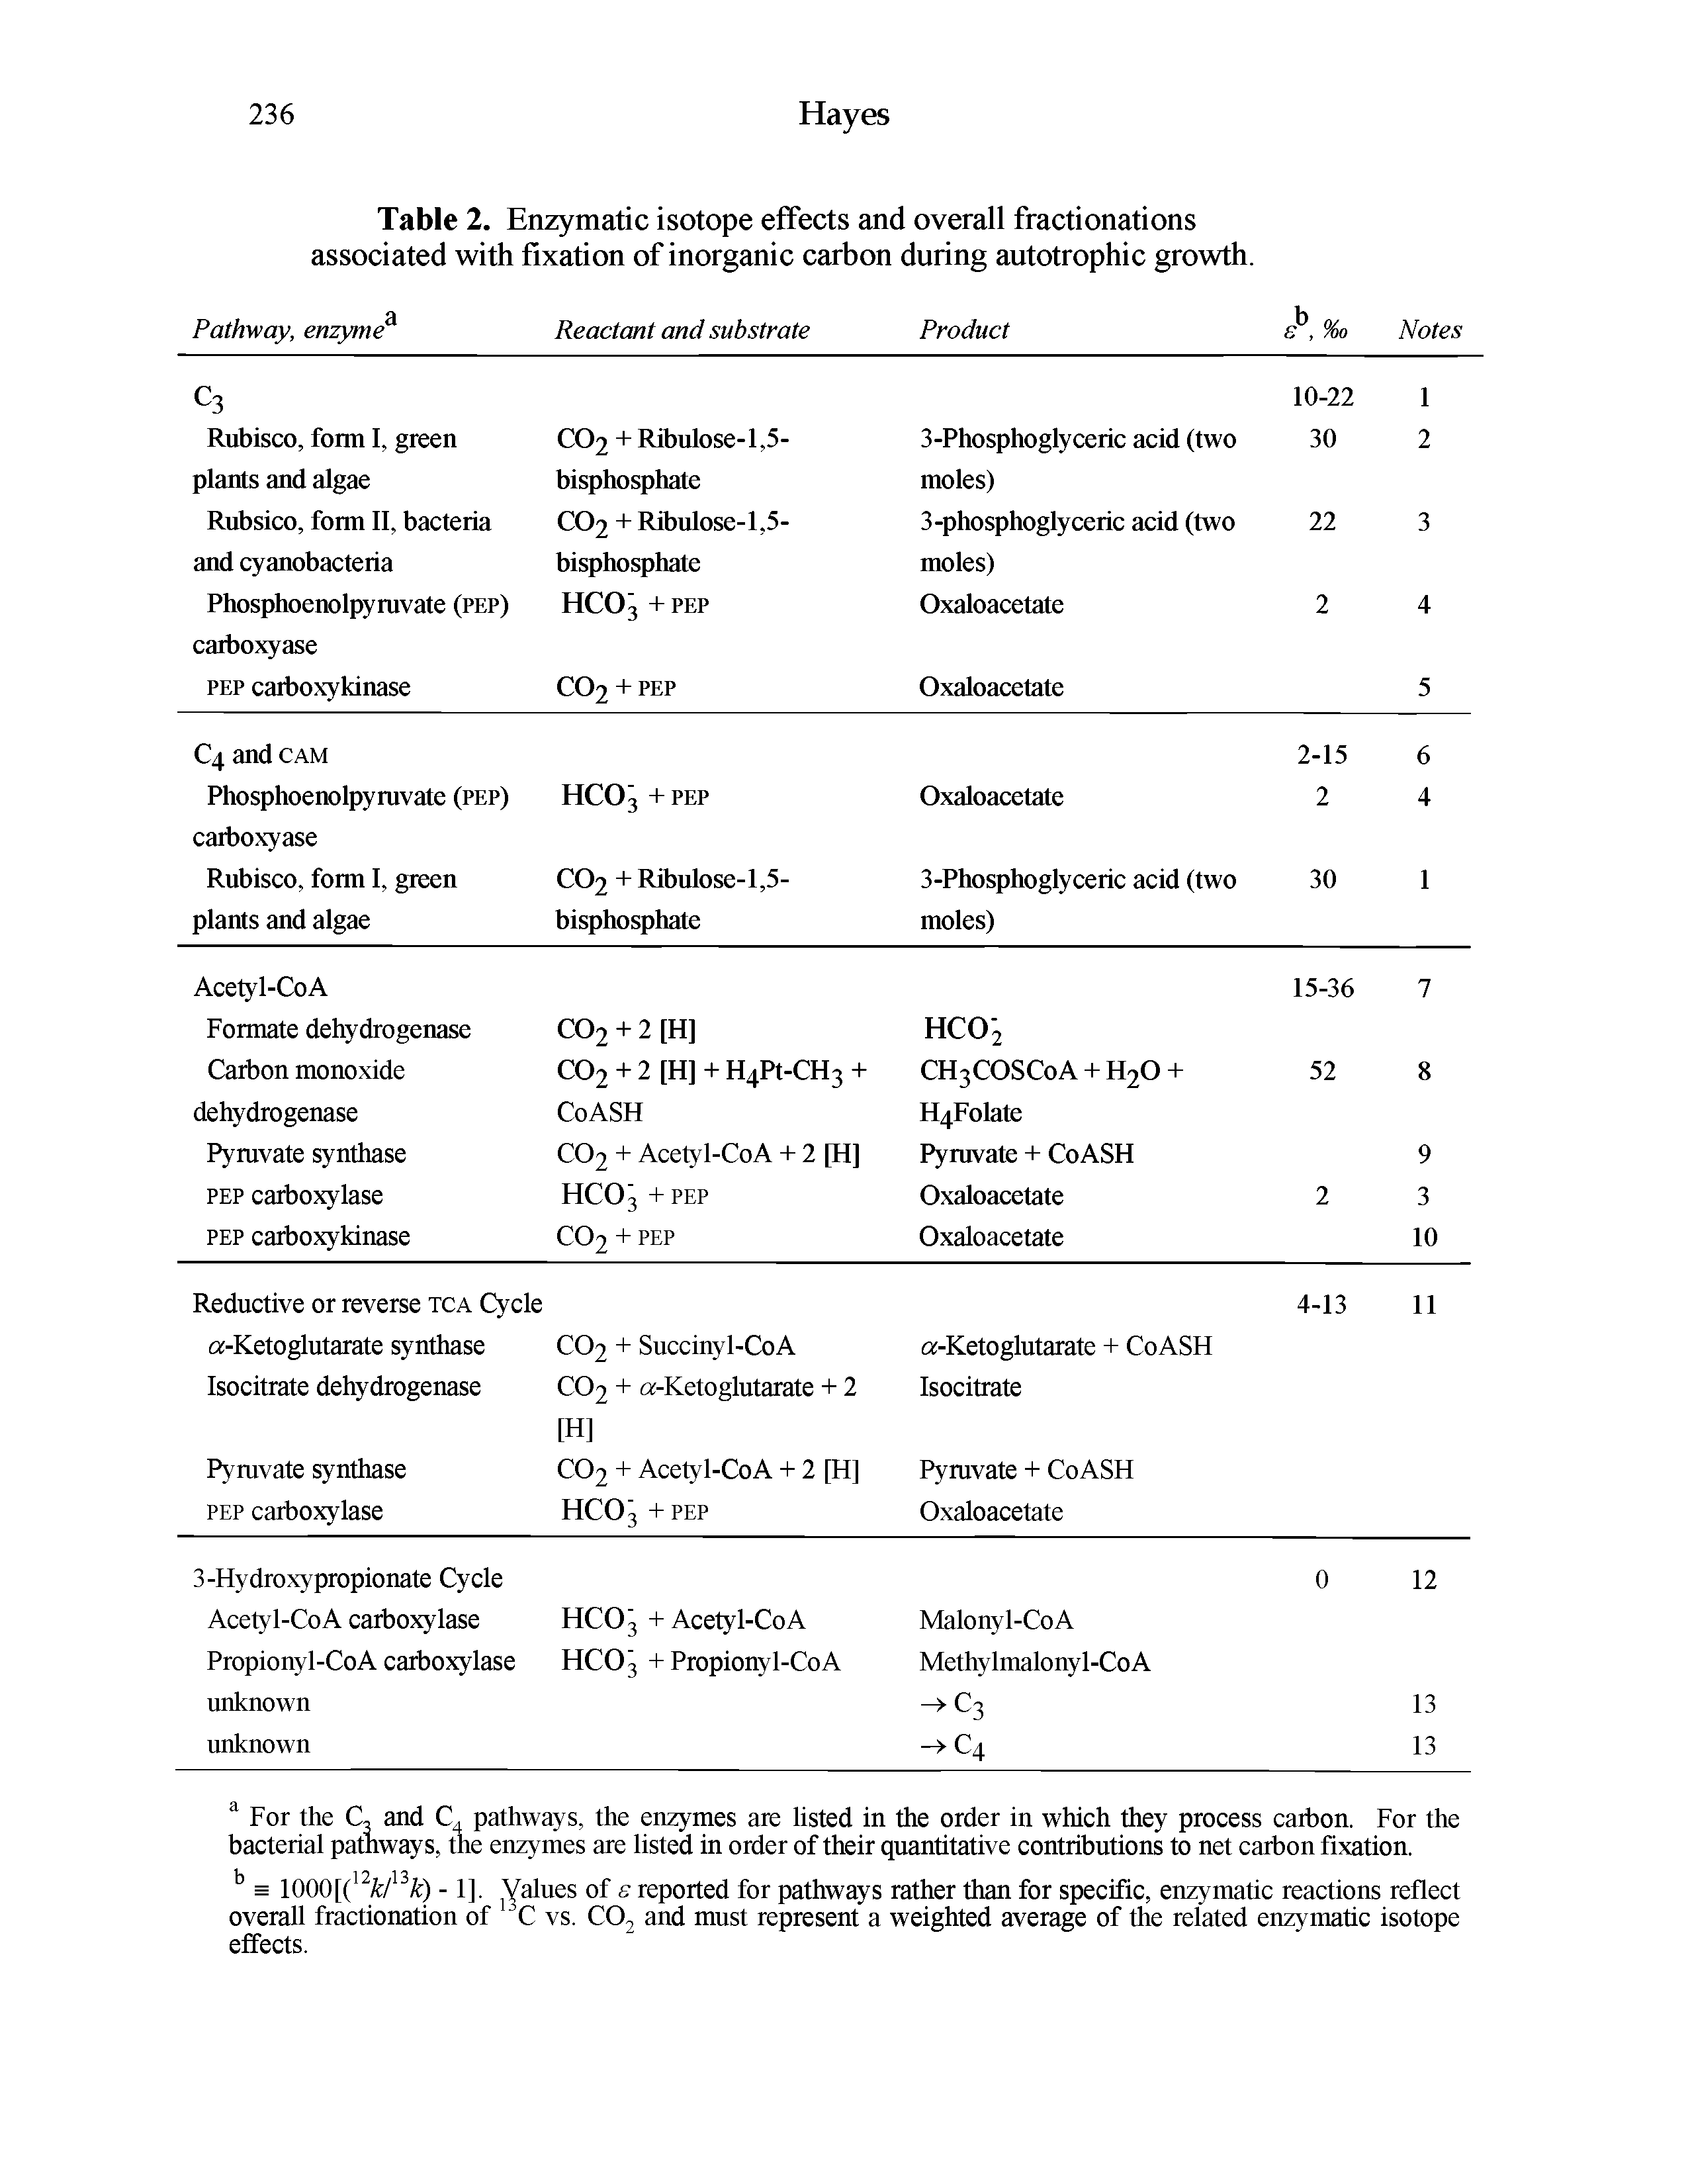 Table 2. Enzymatic isotope effects and overall fractionations associated with fixation of inorganic carbon during autotrophic growth.